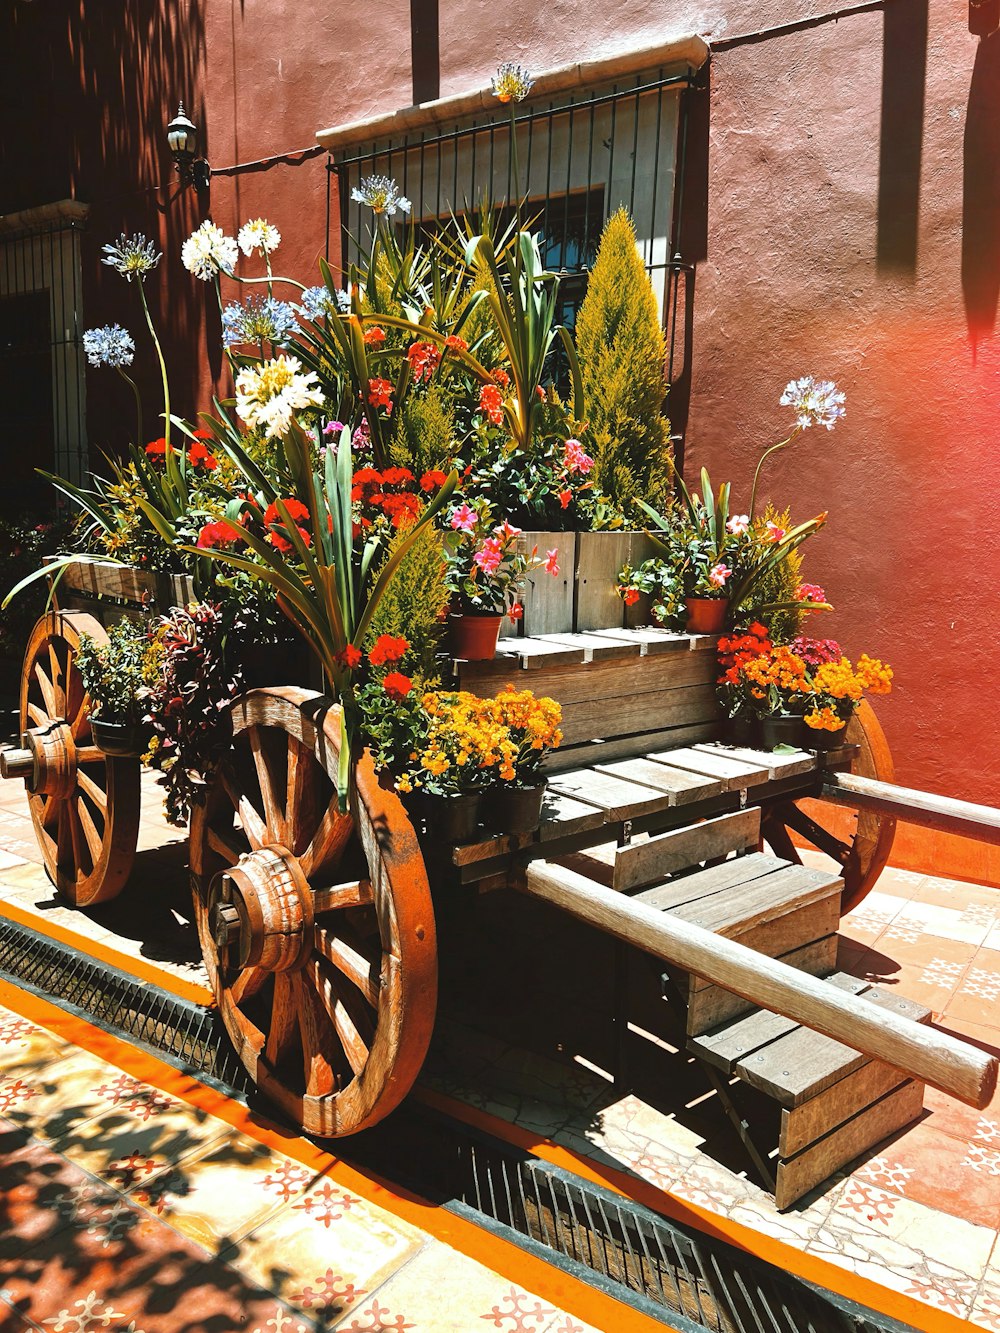 a wooden cart with flowers in it sitting on a sidewalk